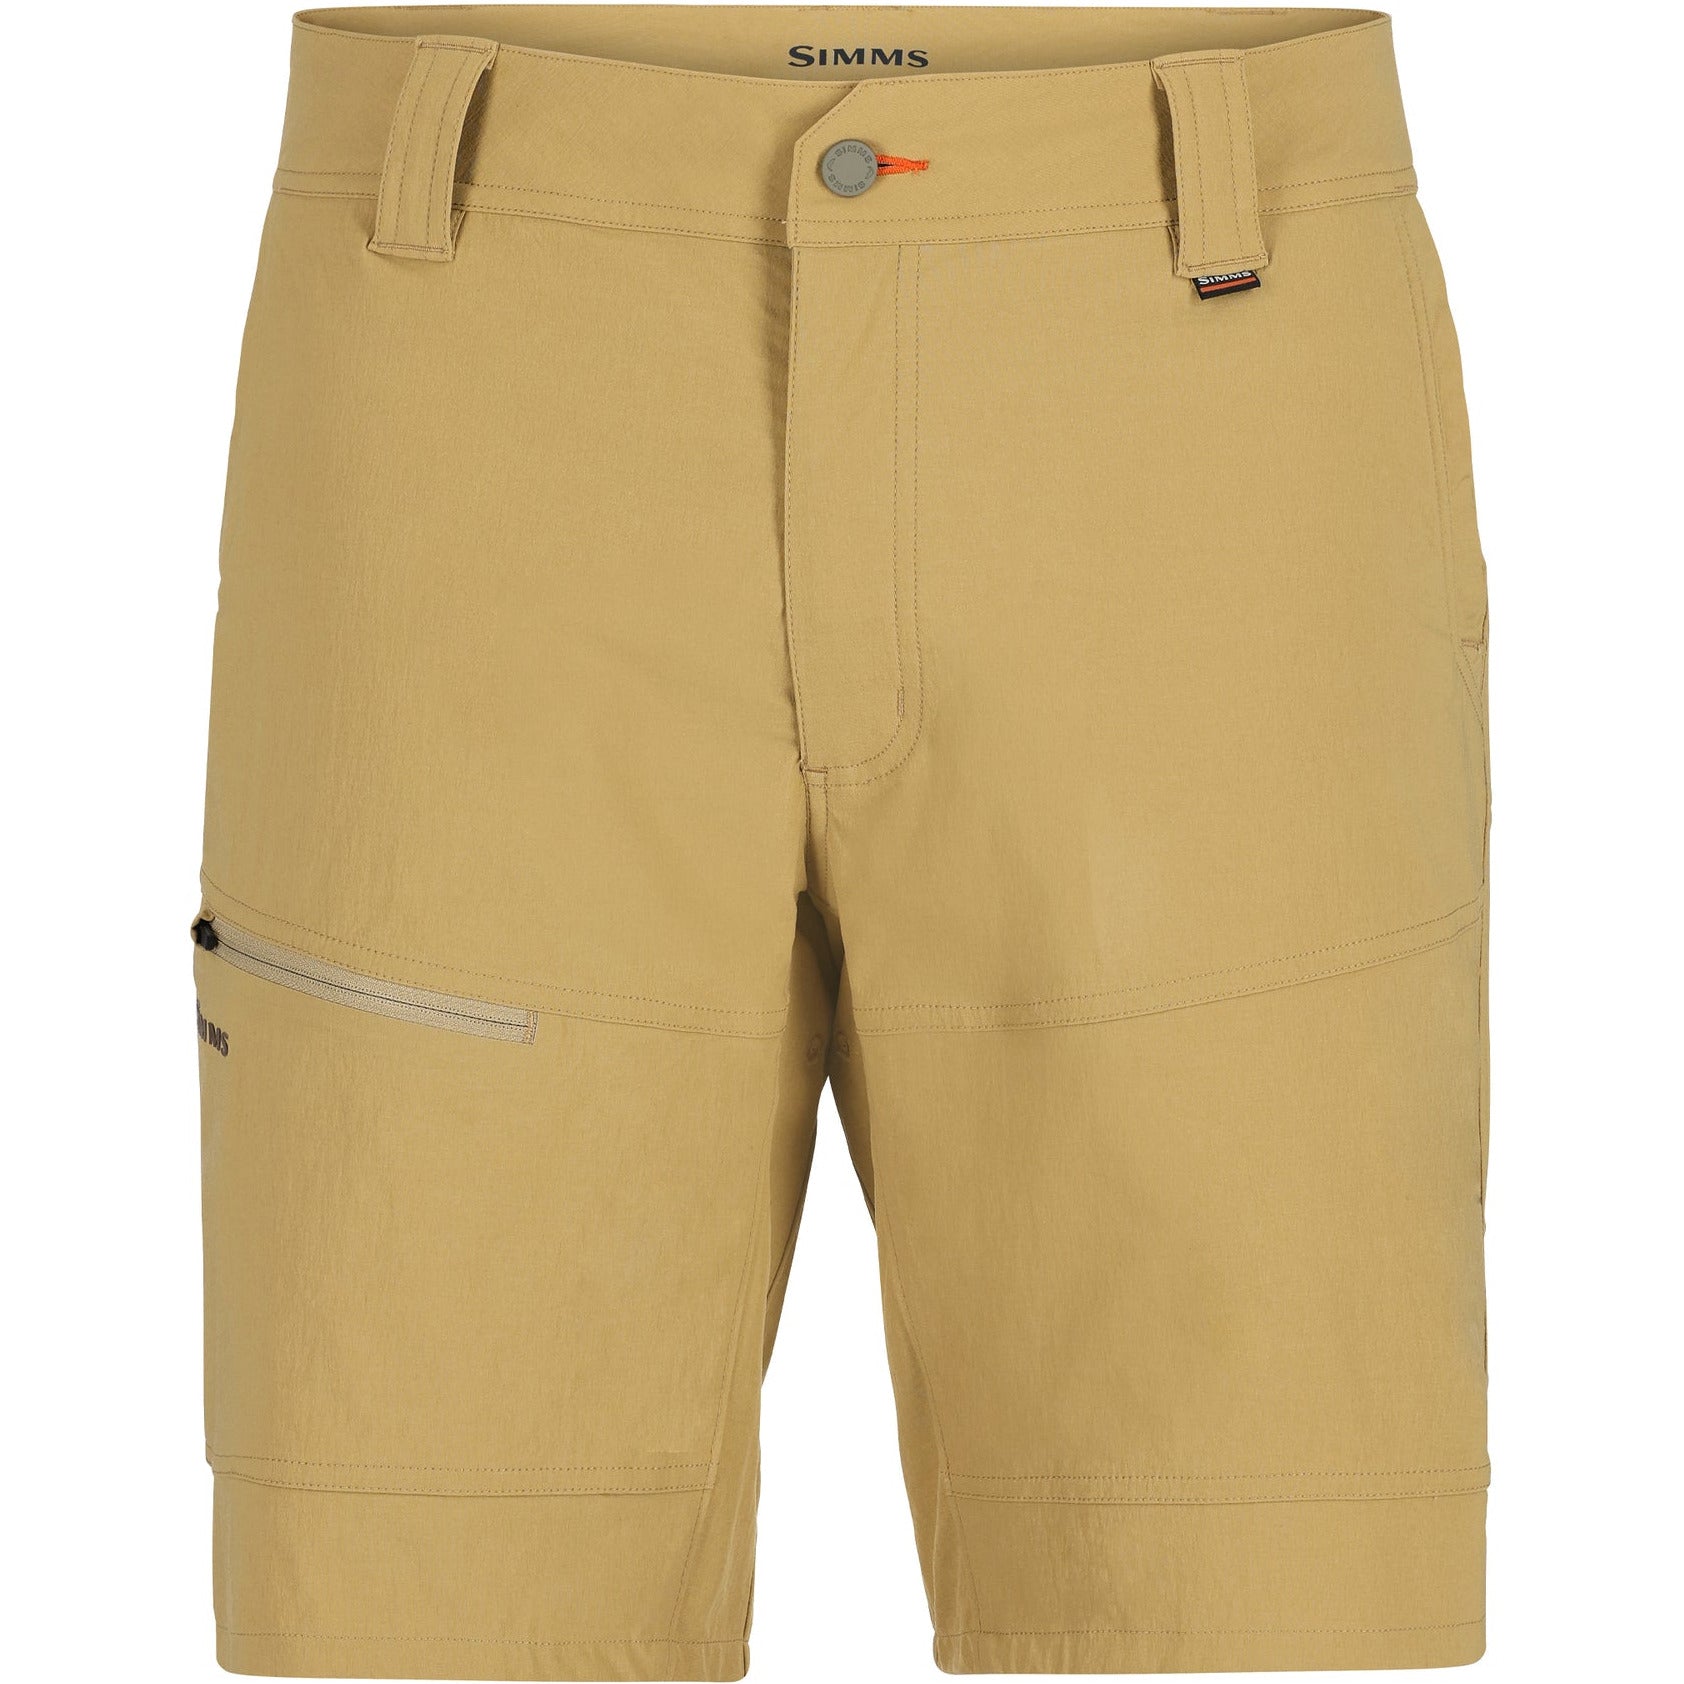 Simms Guide Shorts - Camel